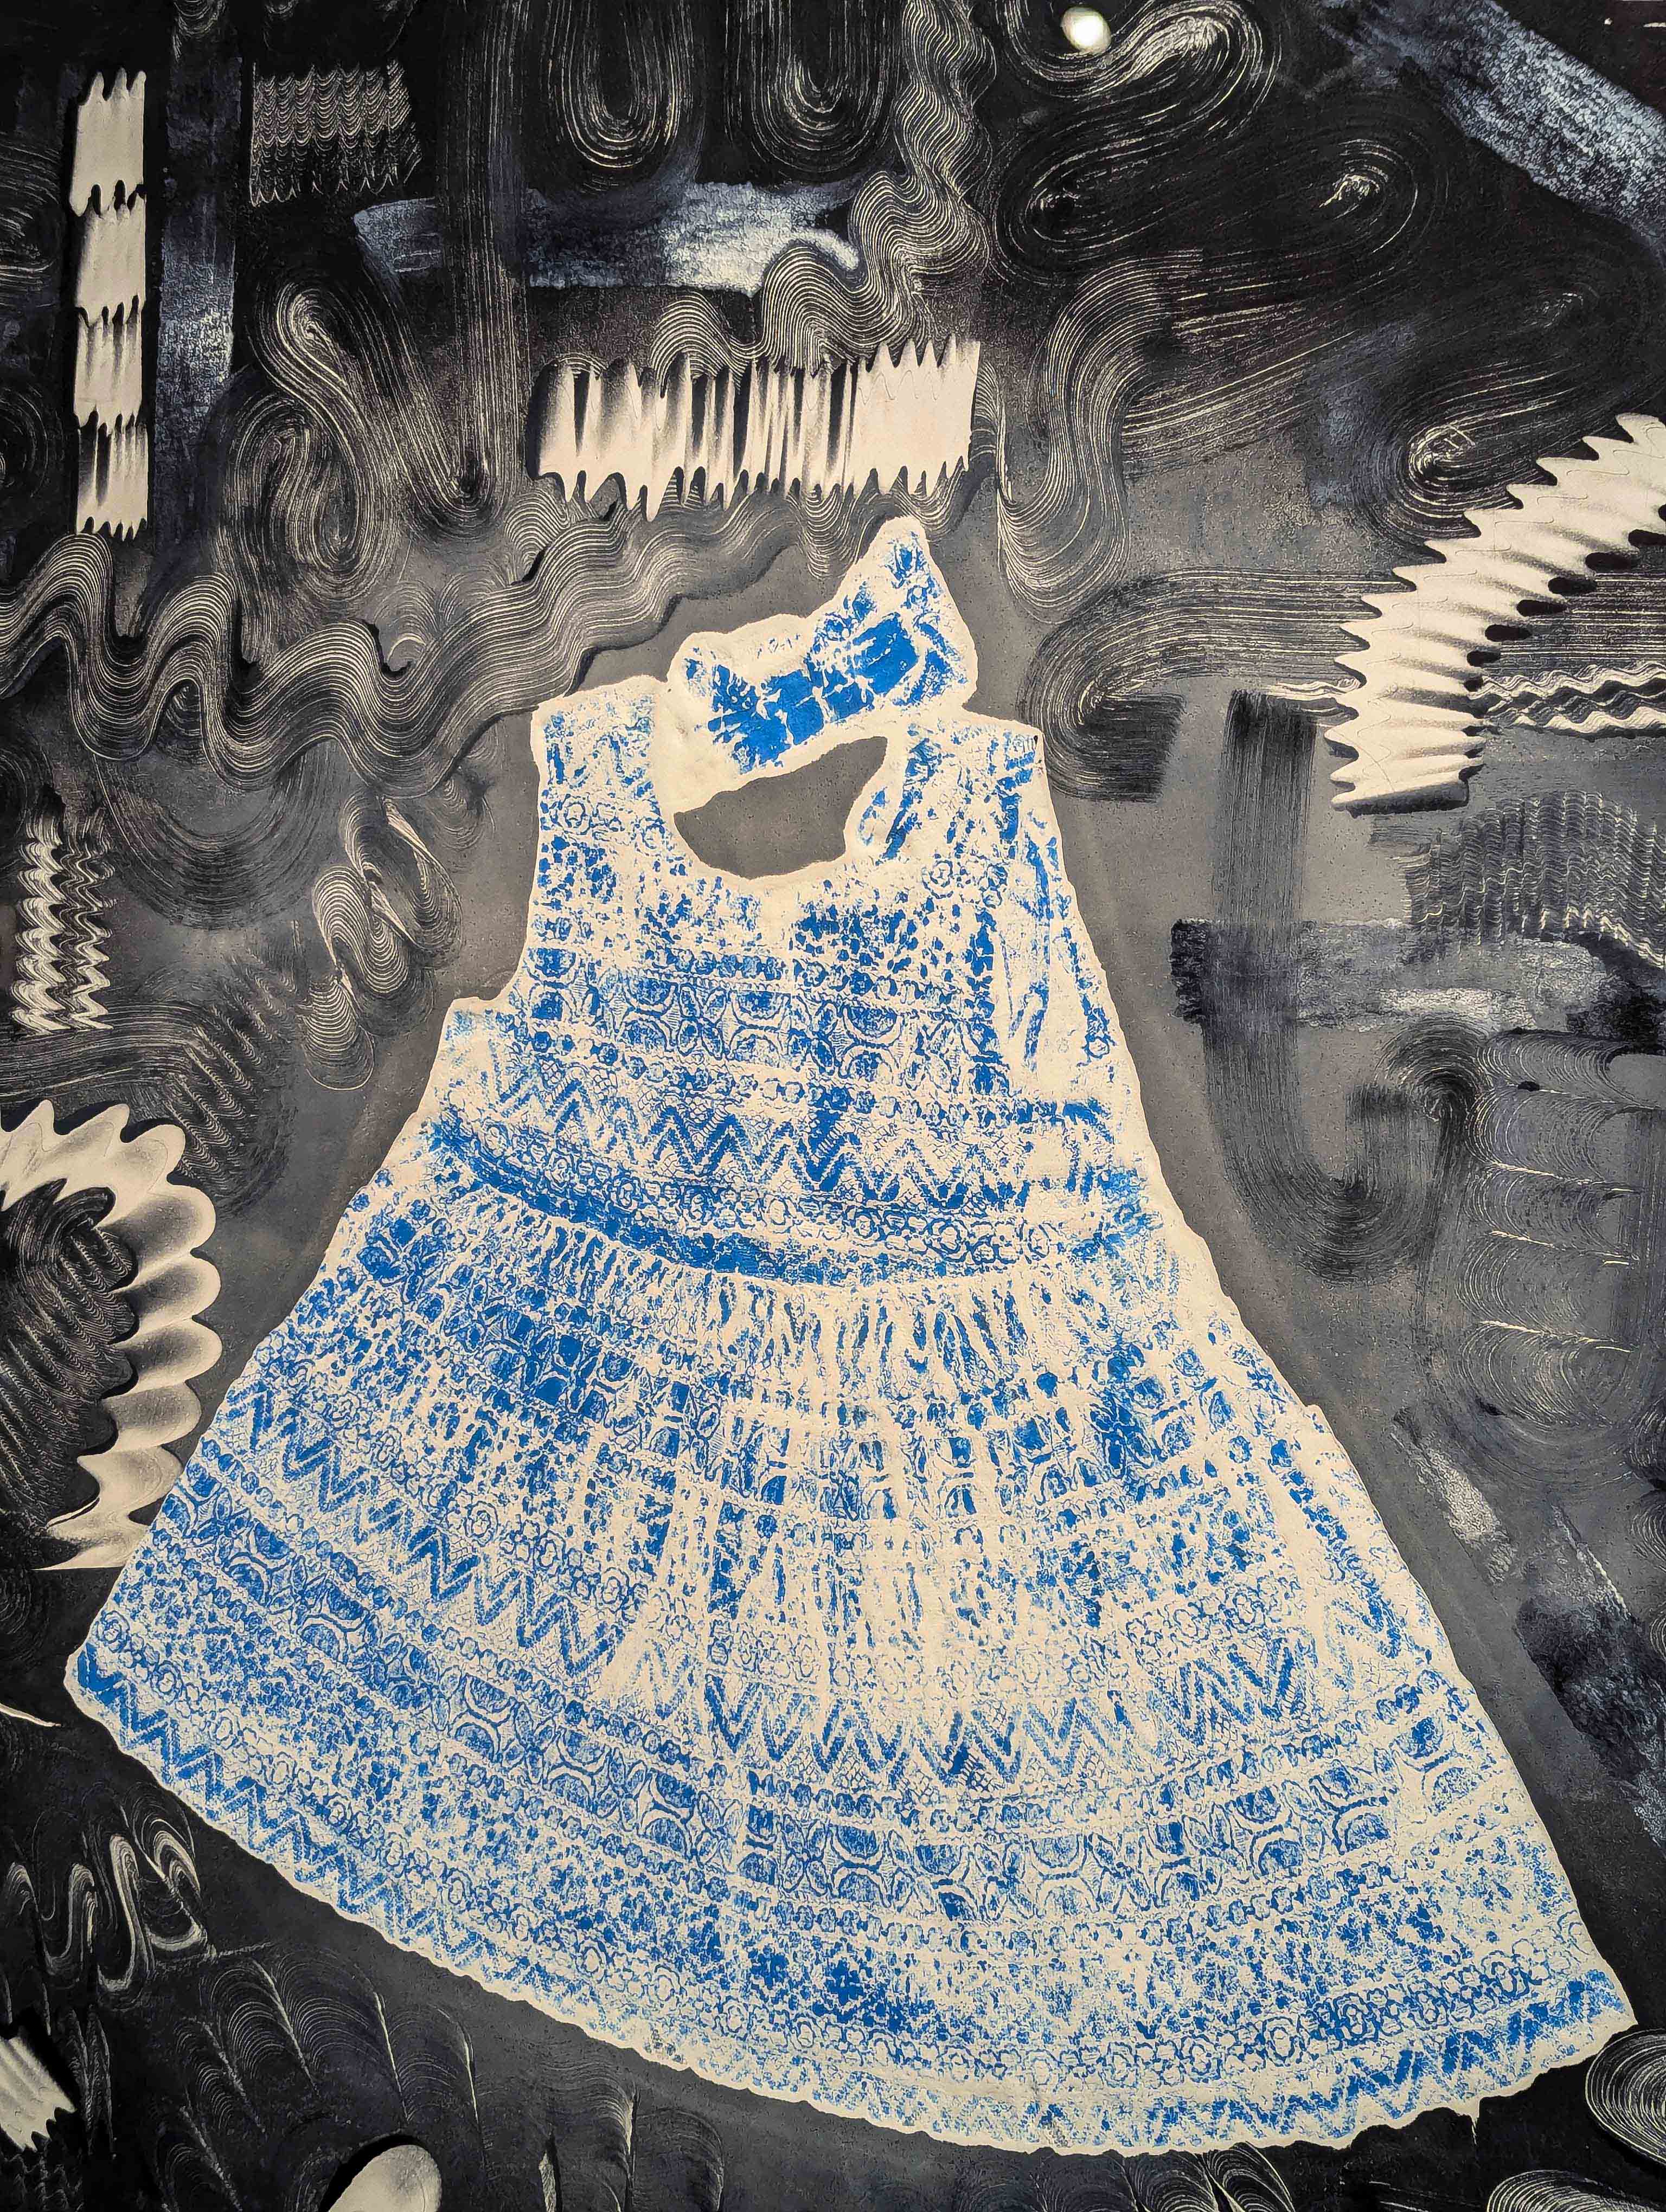 No pressure gallery. Painting of a dress